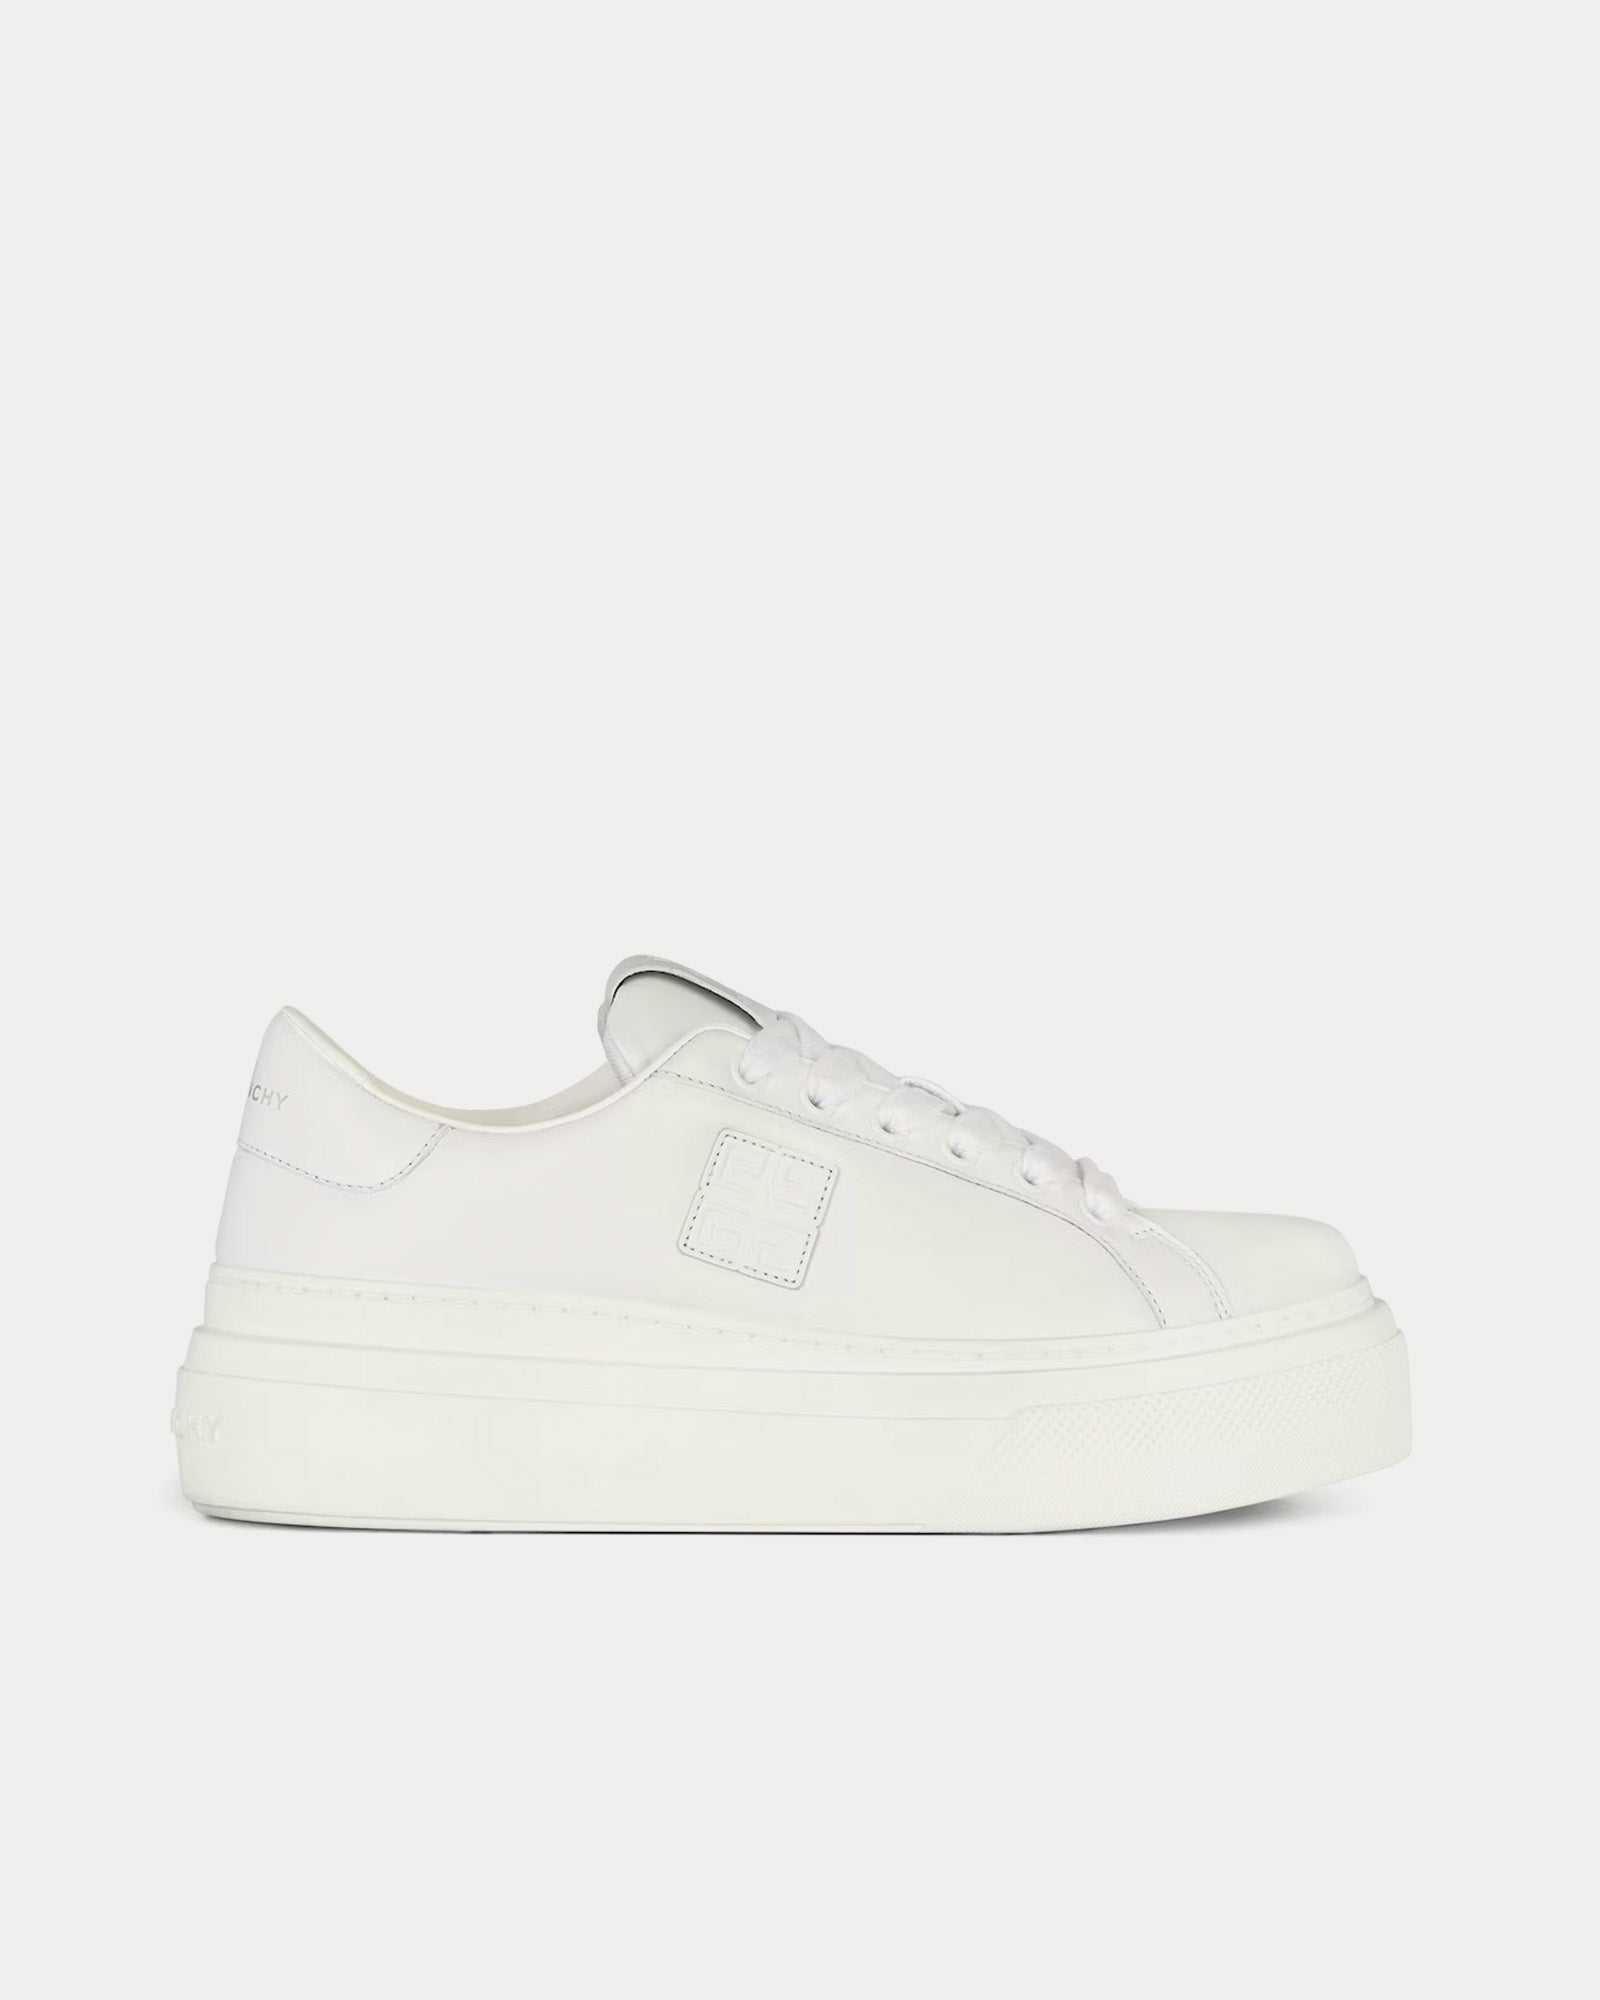 Givenchy - City Platform Leather White Low Top Sneakers